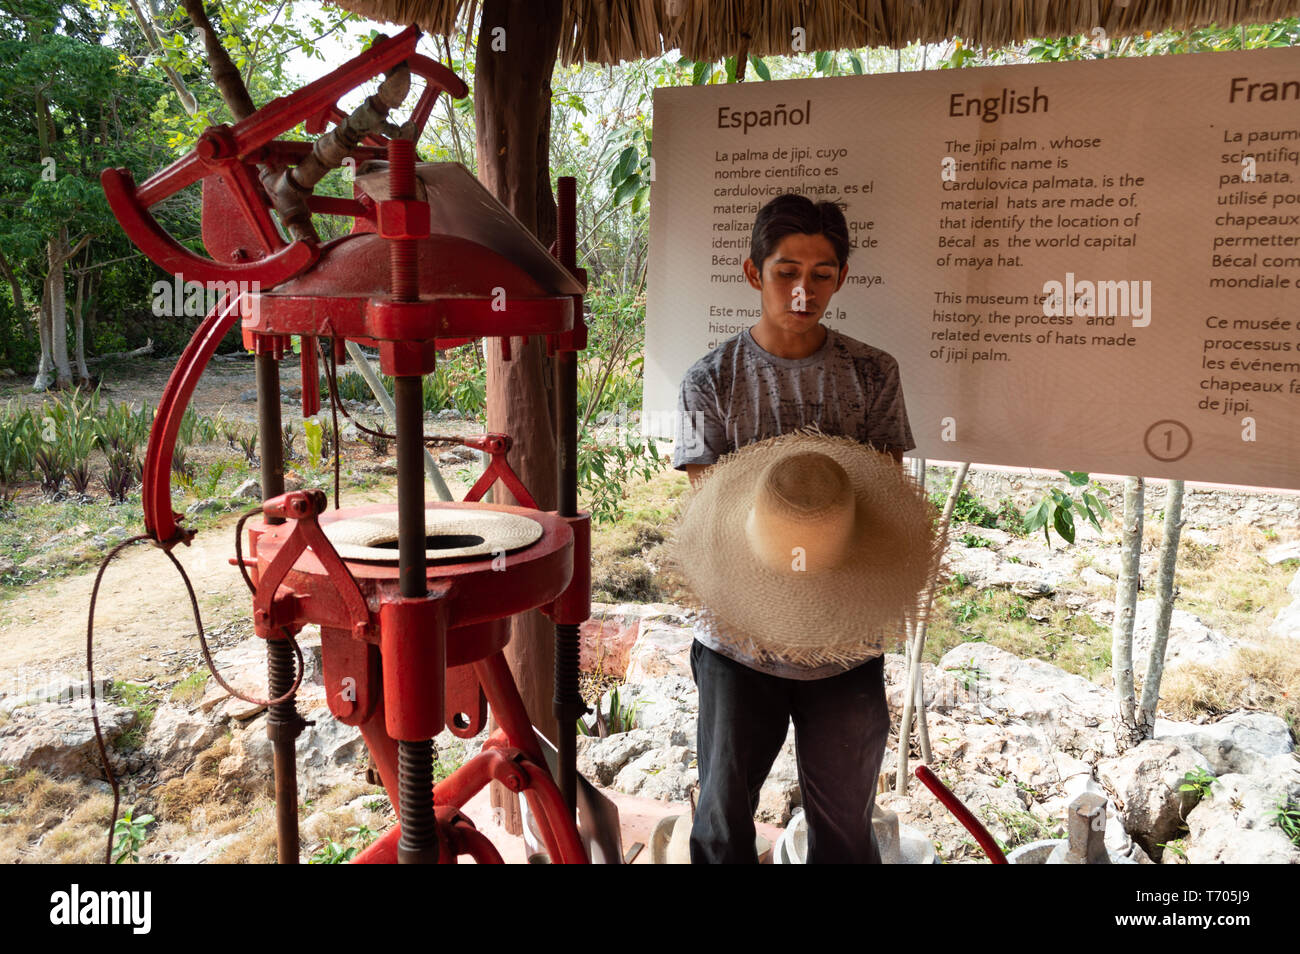 Tour guide at the Becal hat museum teaches visitors how Panama hats are made using the traditional machinery.  Campeche, Mexico. Stock Photo